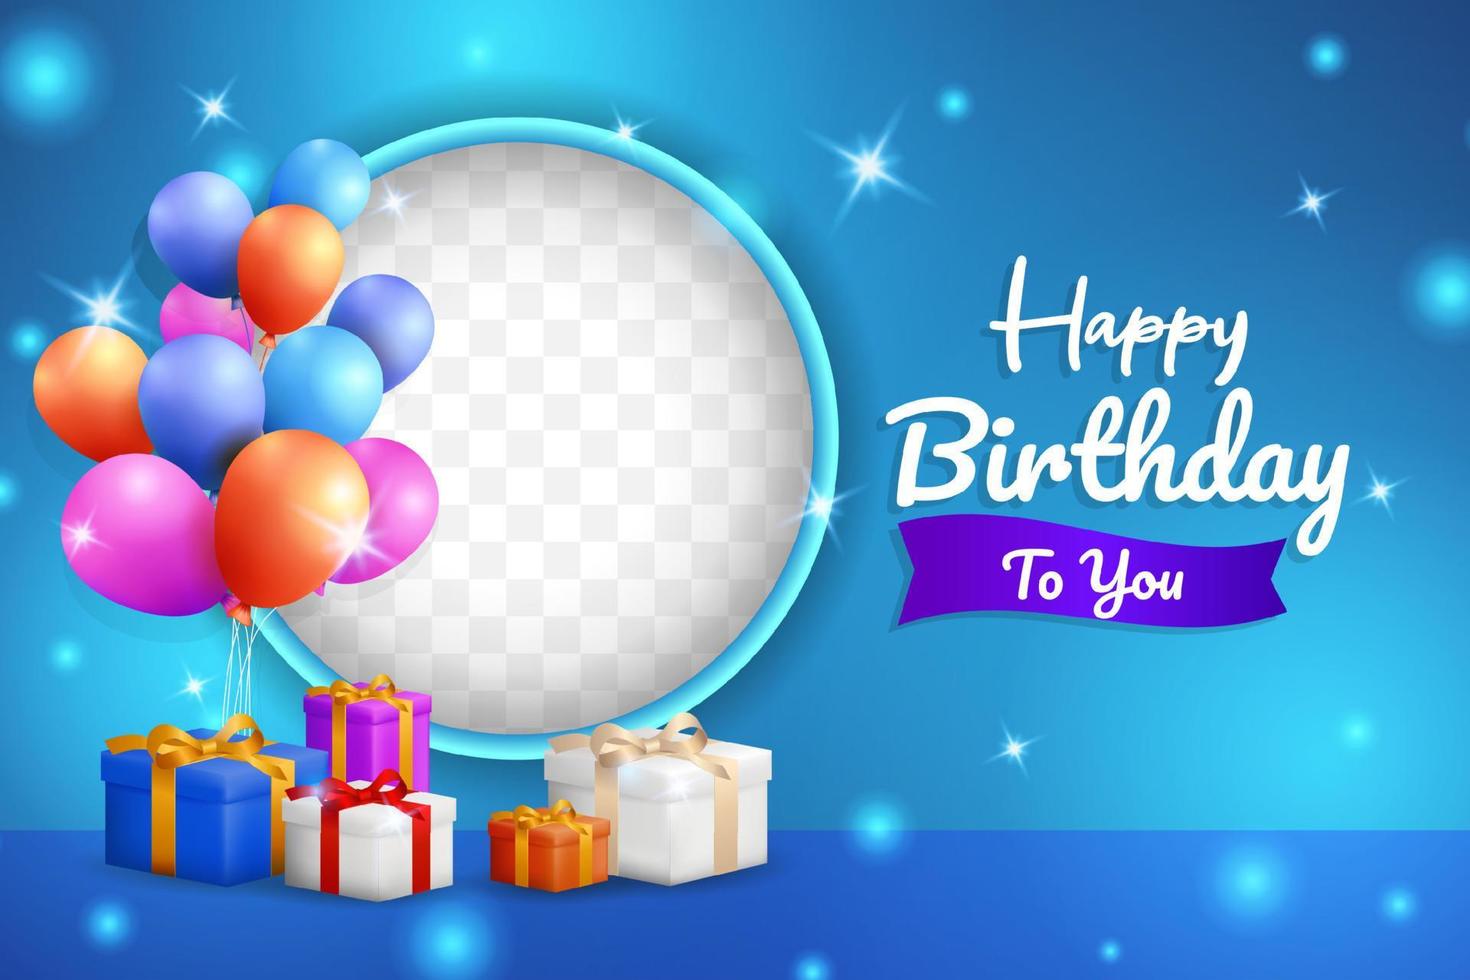 Happy birthday background design with realistic balloons 5724128 ...